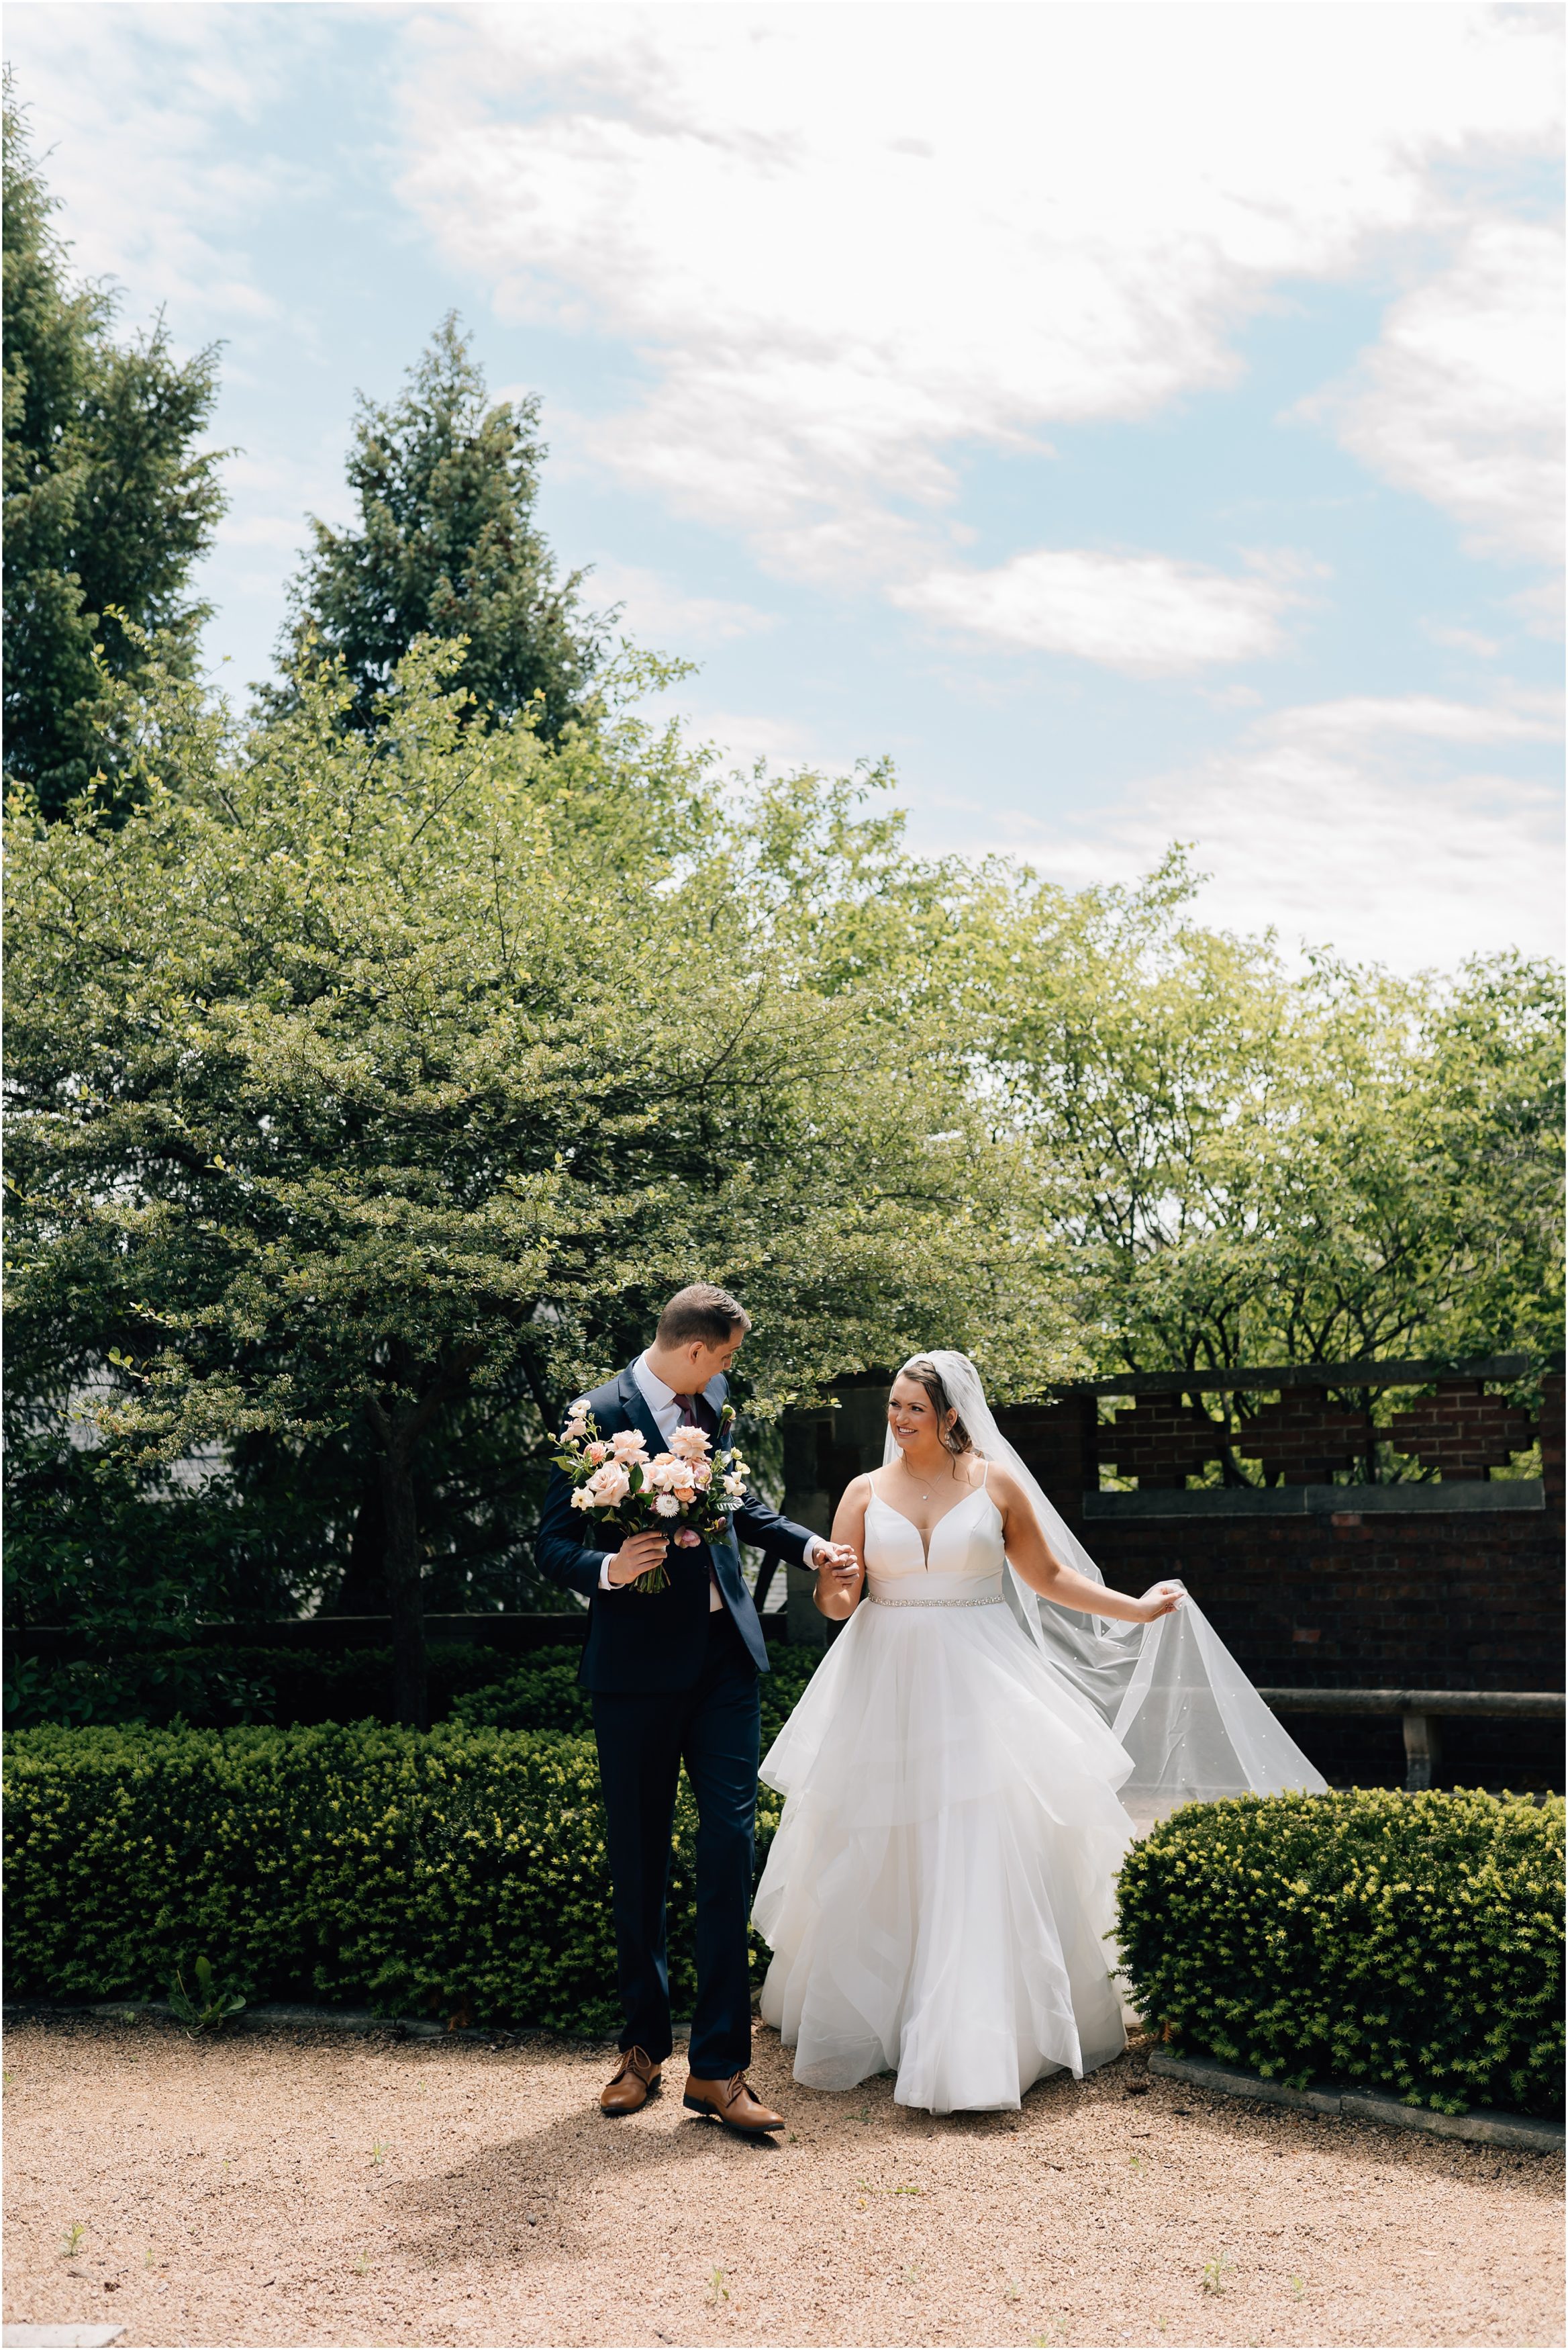 Bride and Groom walk hand in hand through the courtyard at Rollins Mansion in Des Moines Iowa. Photo by Anna Brace, an Omaha NE wedding photographer.